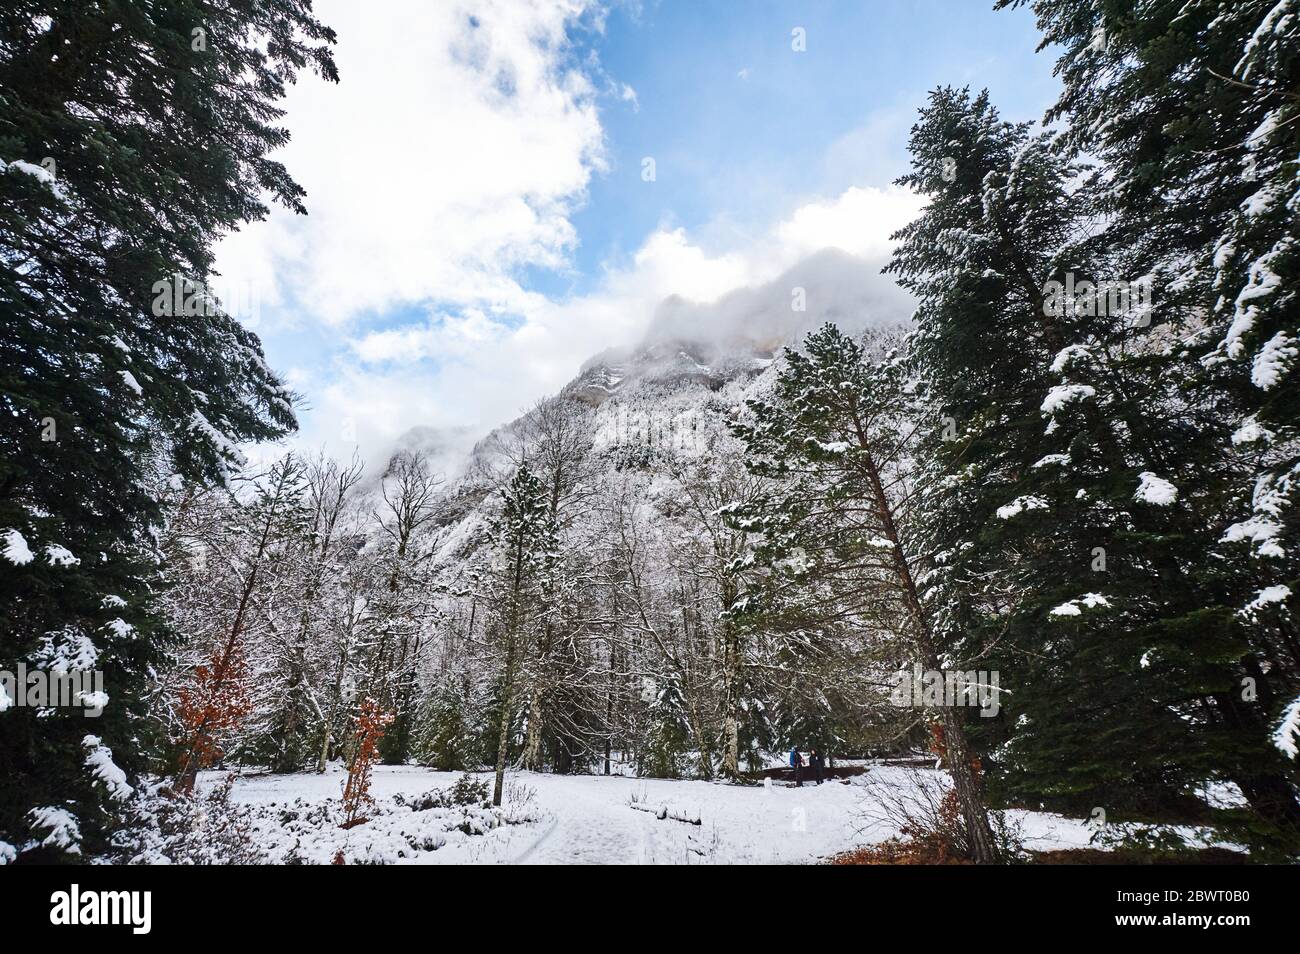 Pyrenees: Snowy alpine forest in the National park of Ordesa and Monte Perdido (Huesca province, Aragon region, Spain) Stock Photo